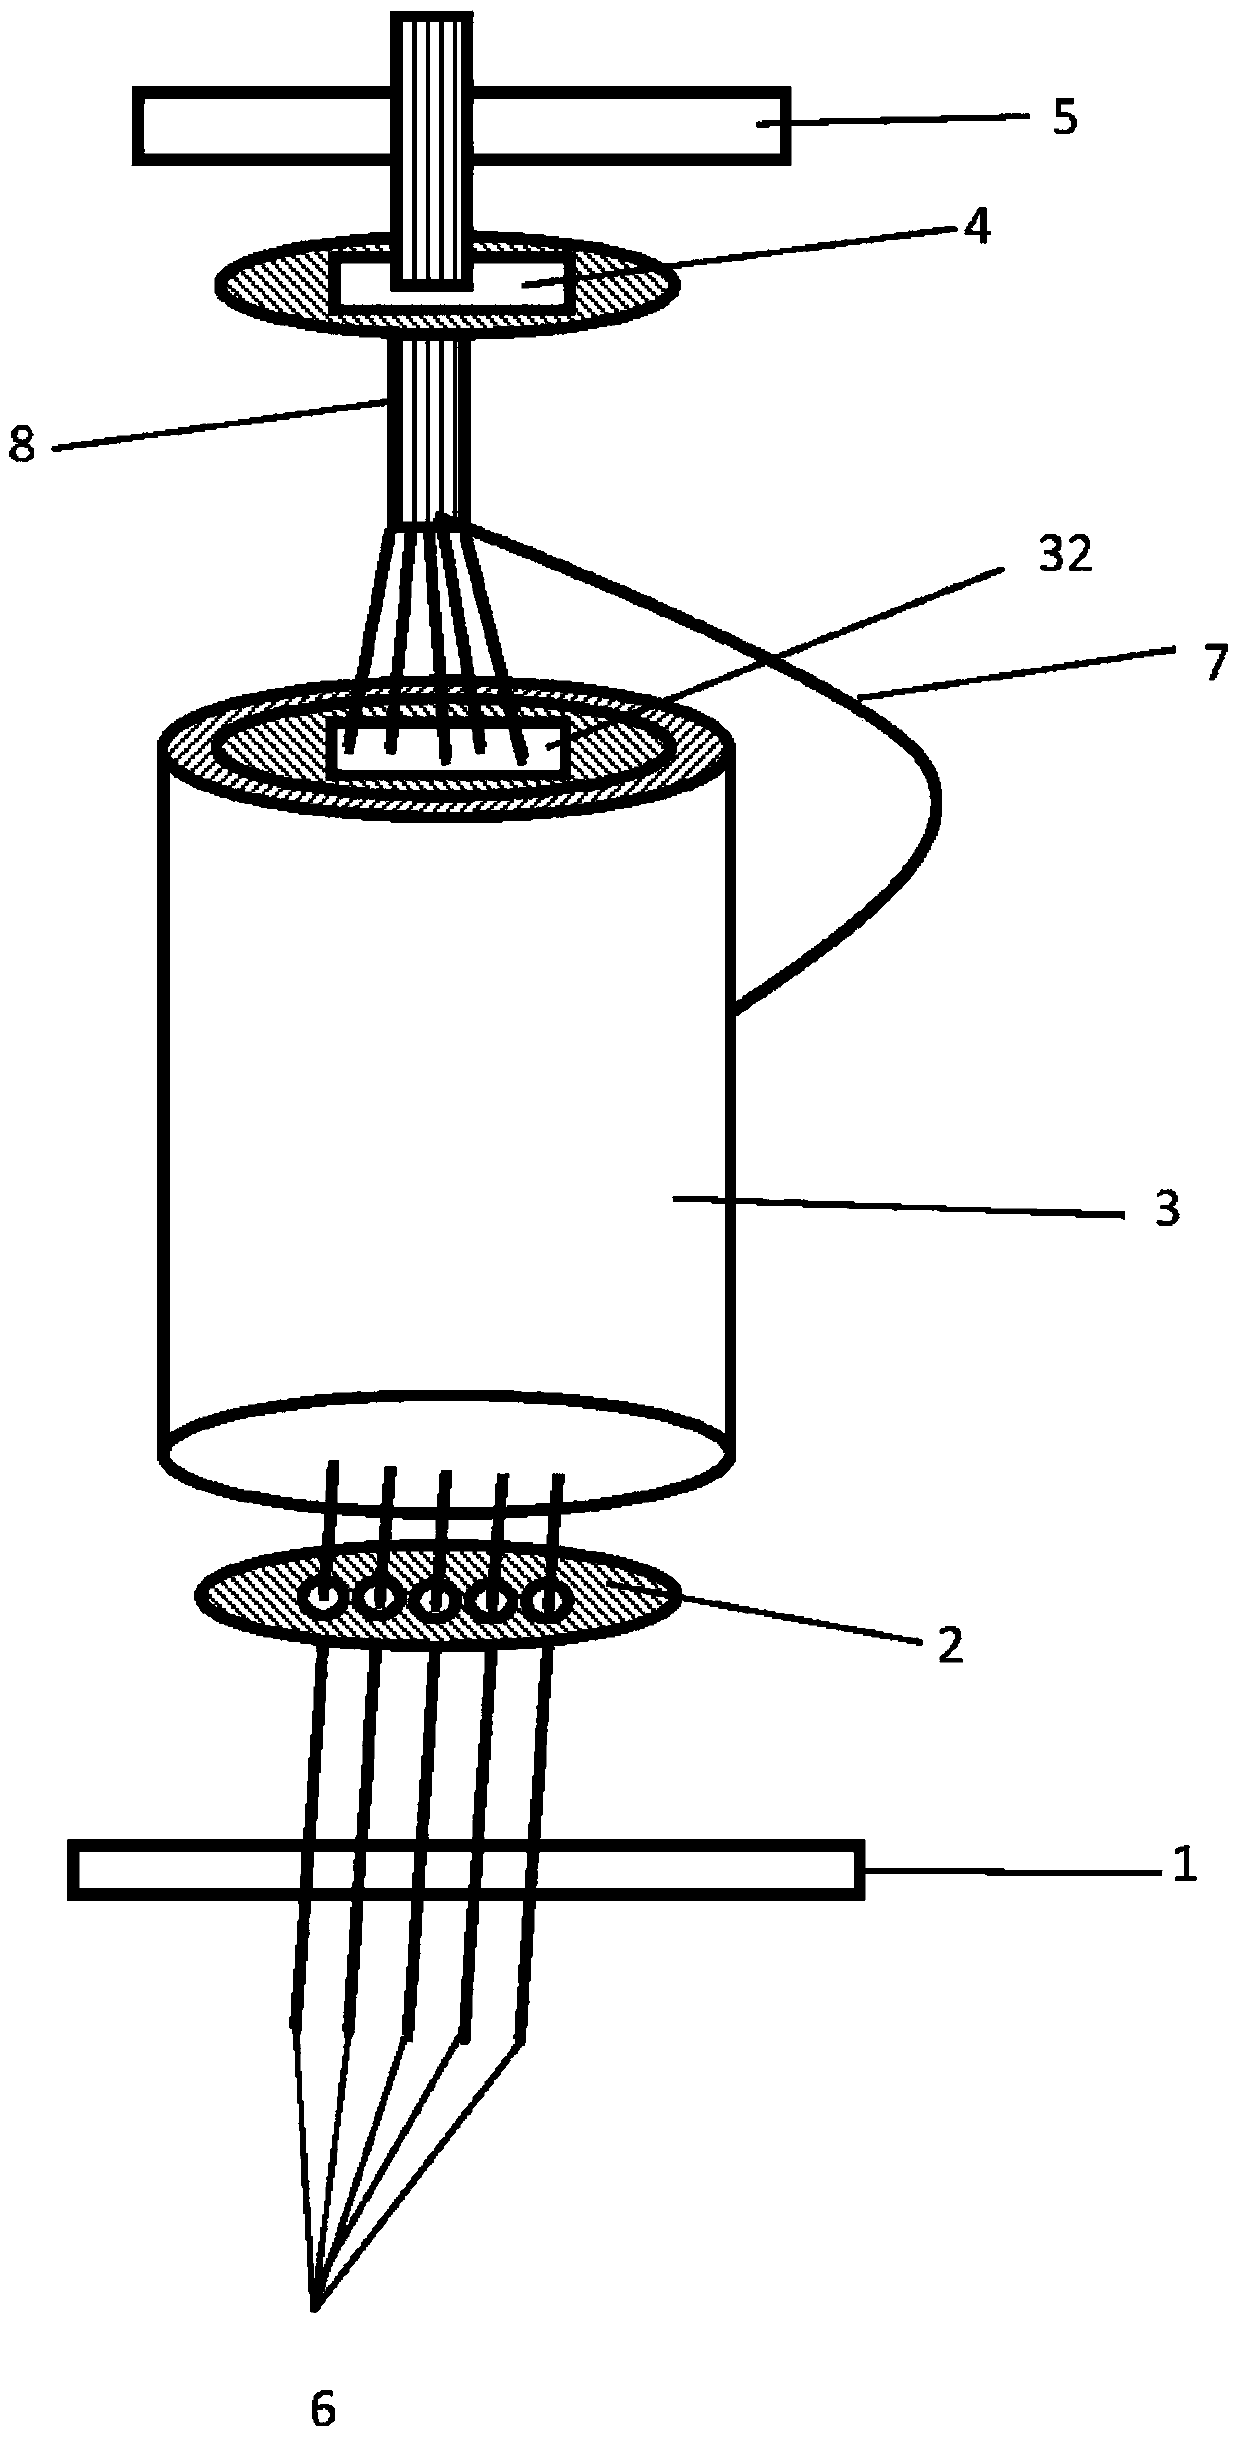 A processing device and method for producing flat yarn